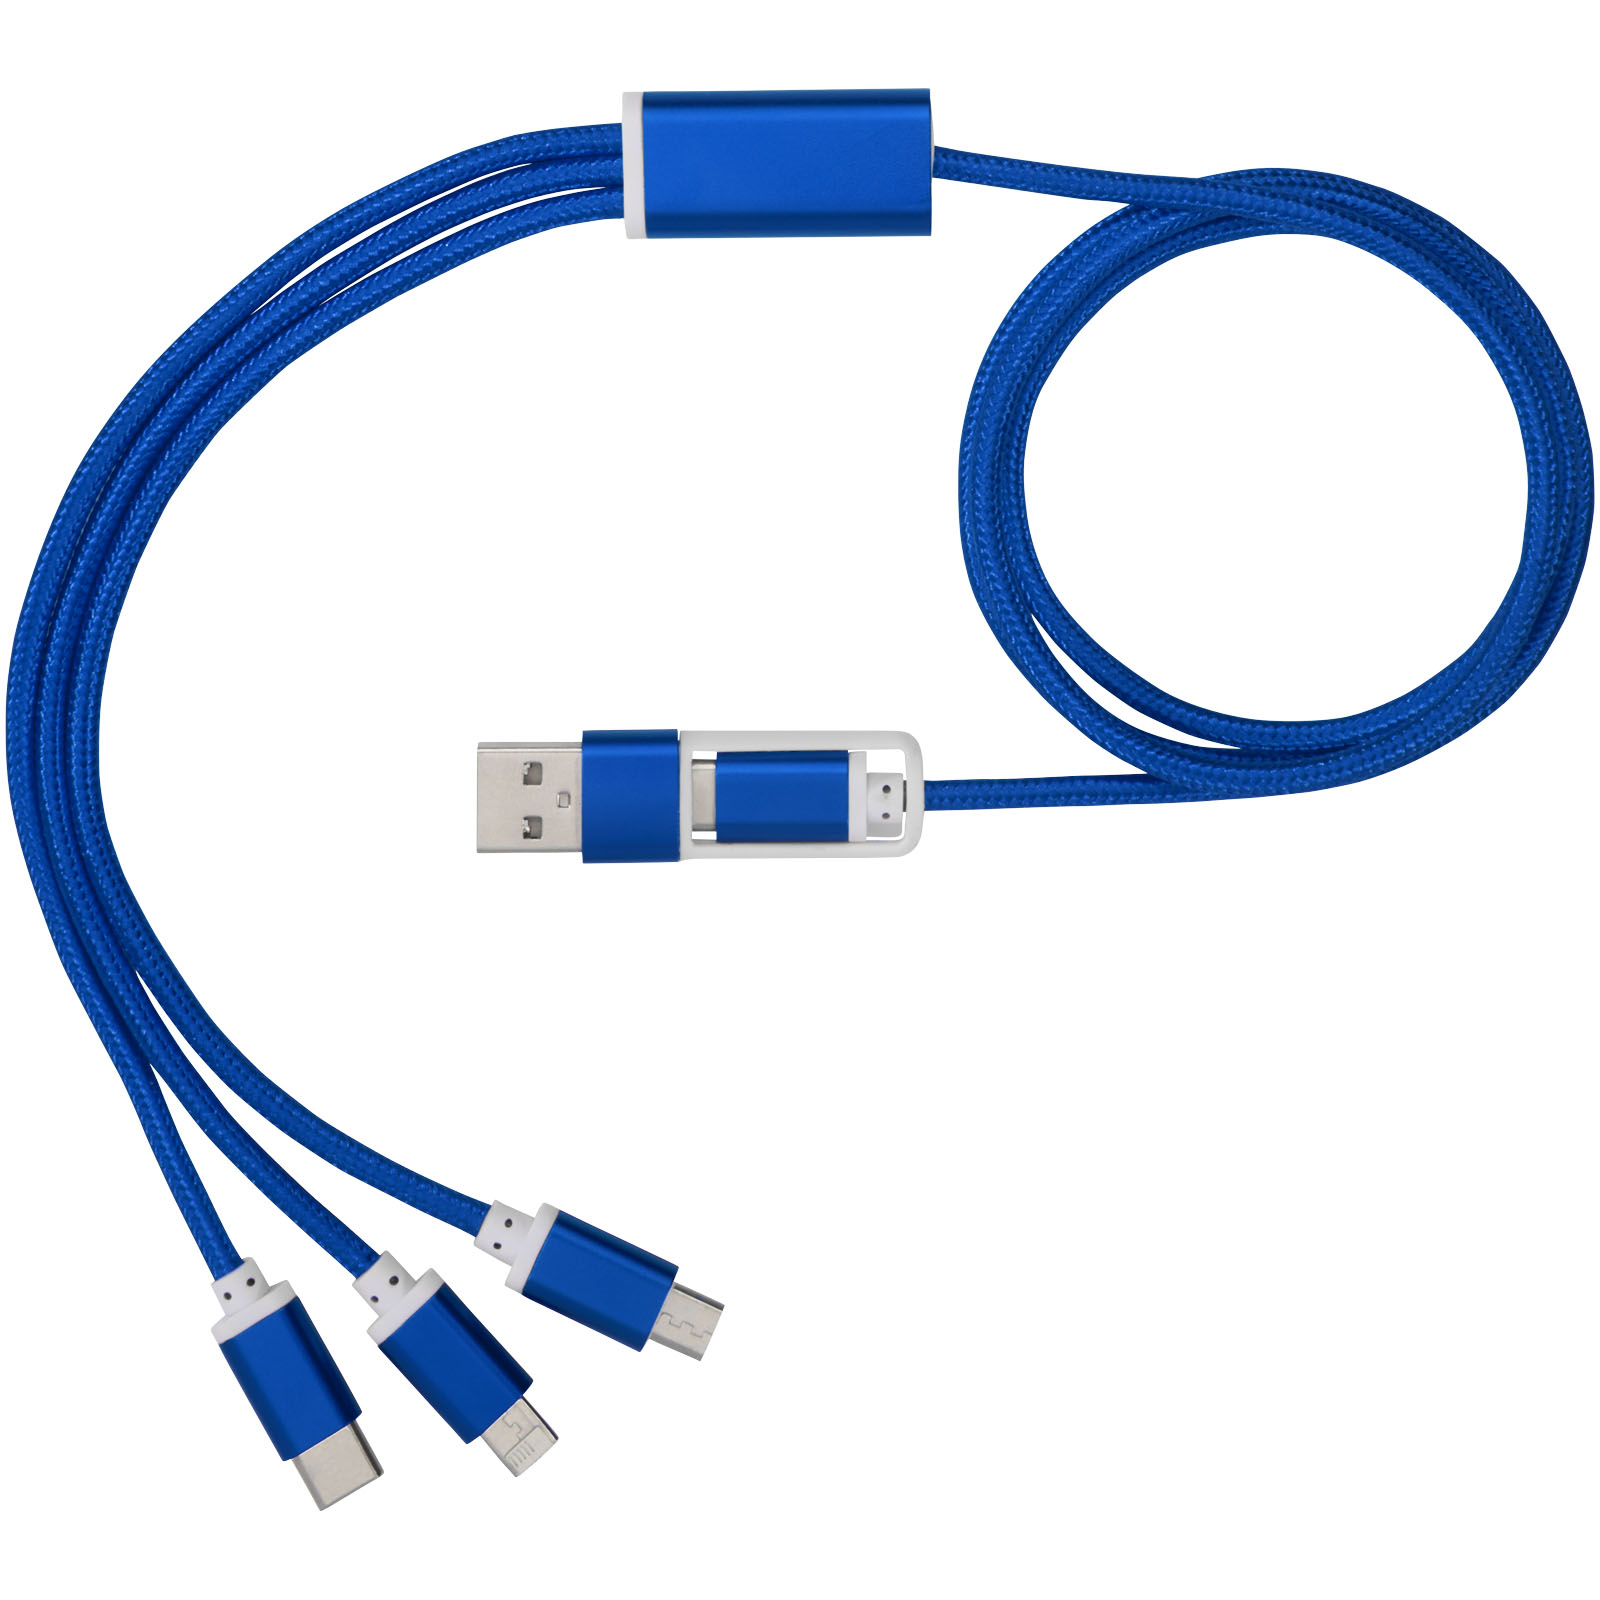 Advertising Cables - Versatile 5-in-1 charging cable - 1